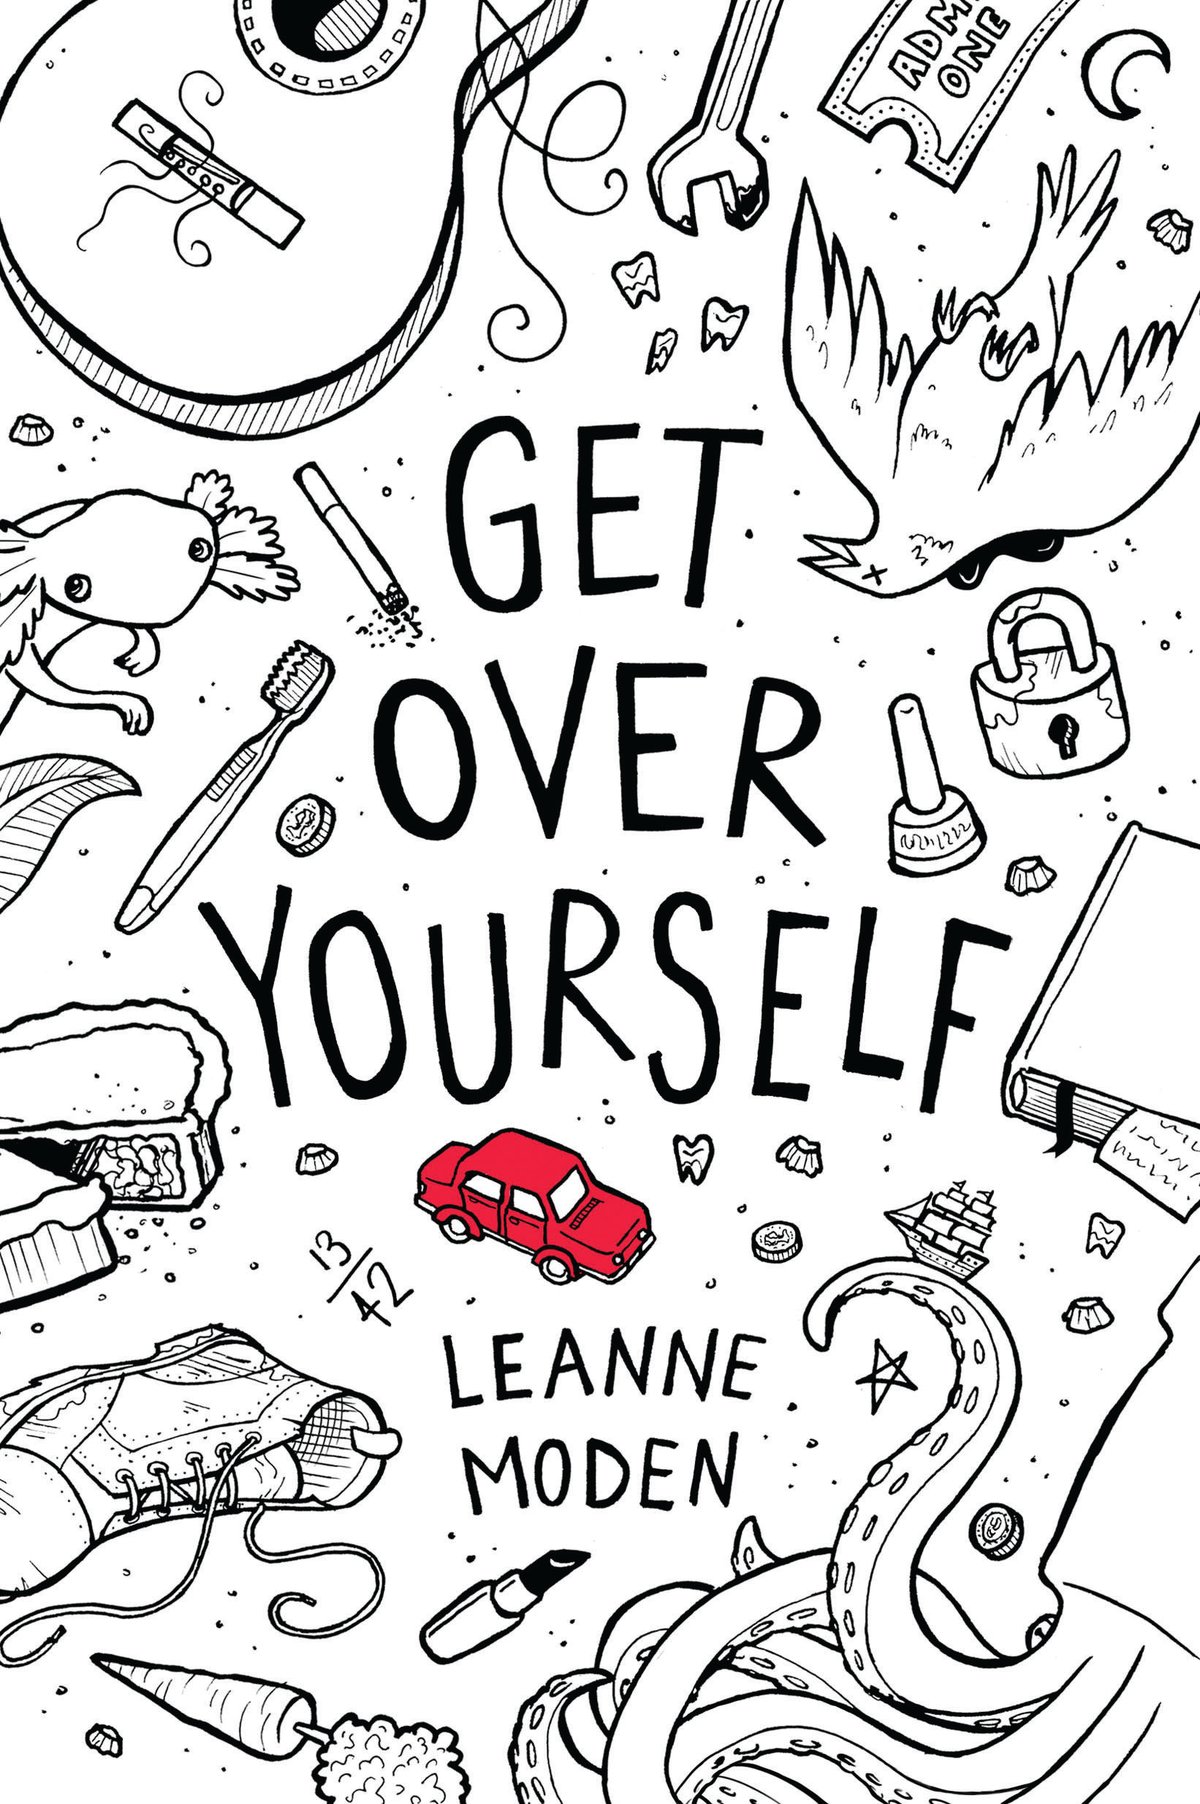 Image of Get Over Yourself by Leanne Moden